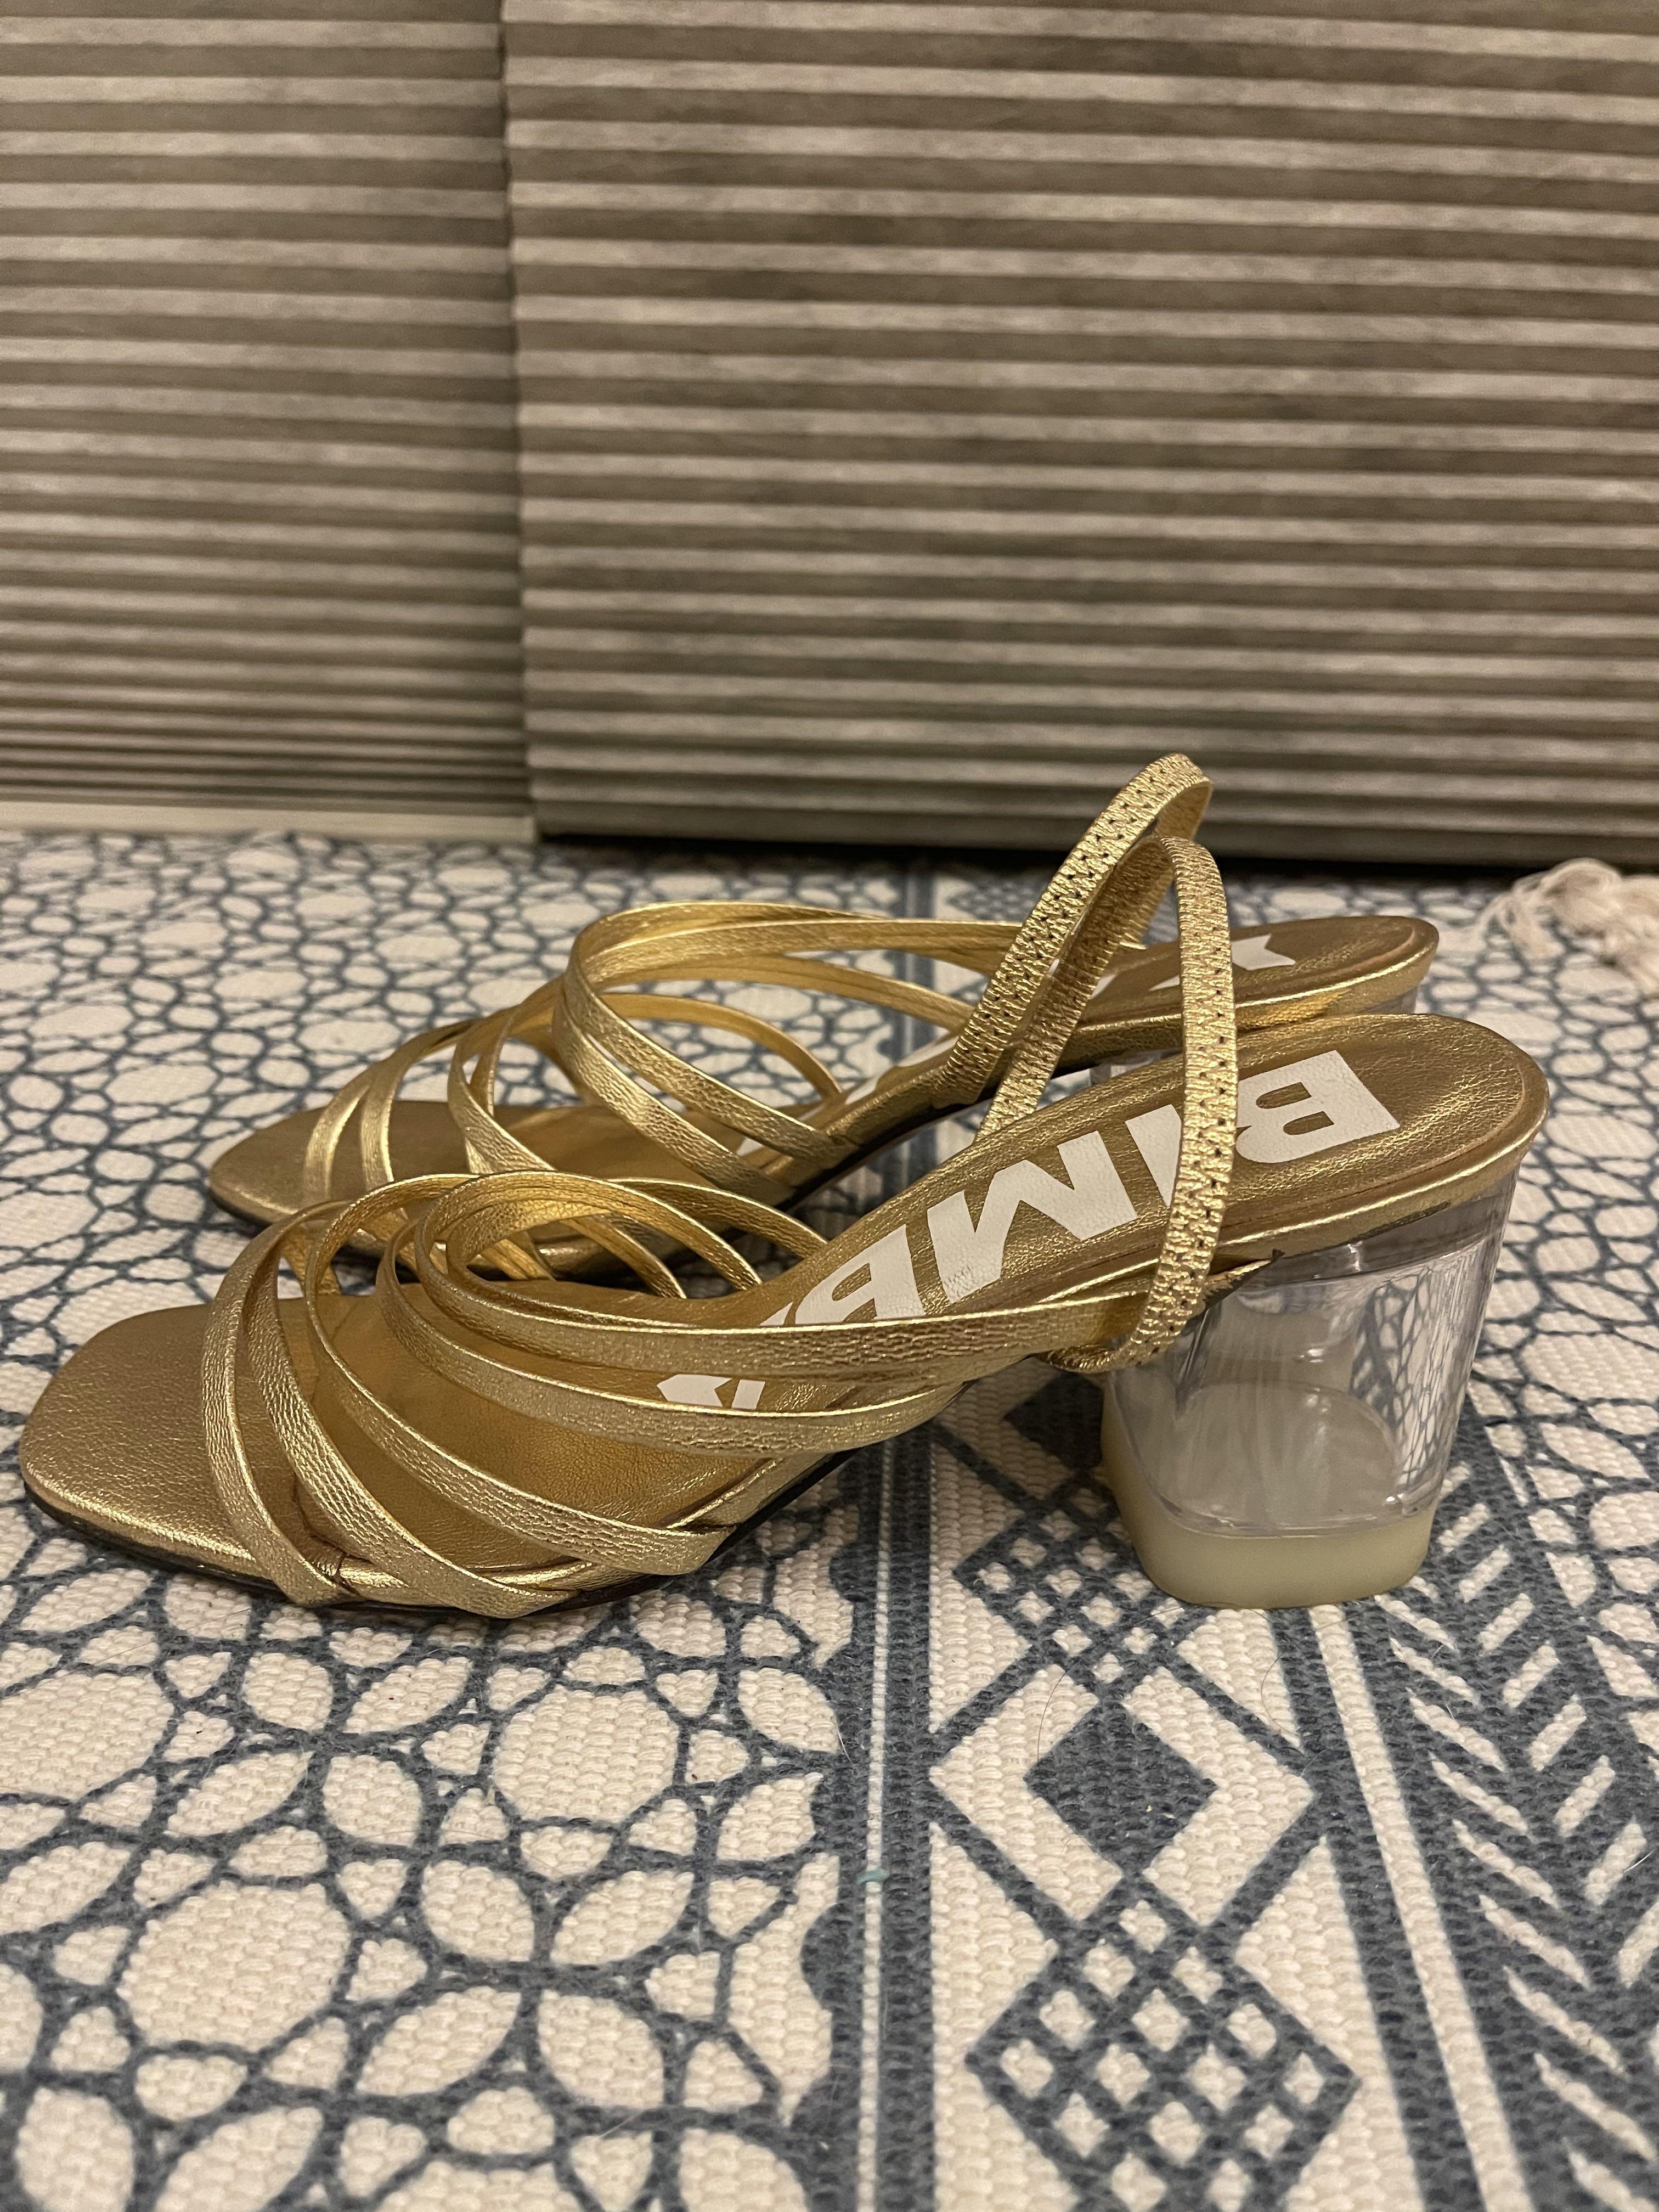 Patent leather sandals Bimba y Lola Gold size 38 EU in Patent